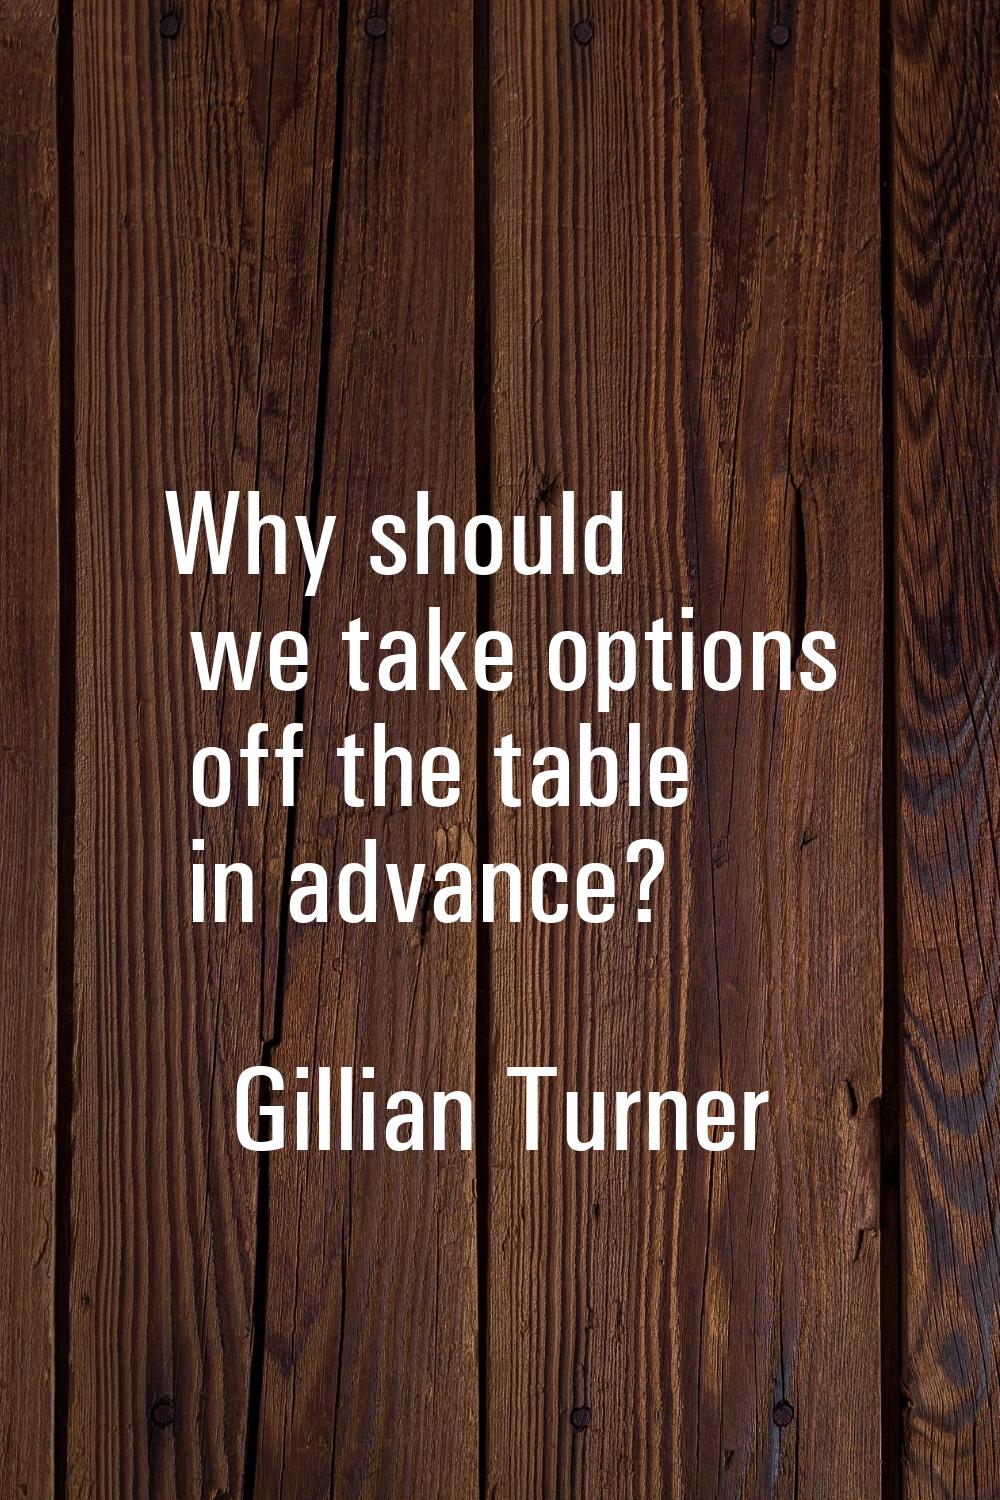 Why should we take options off the table in advance?